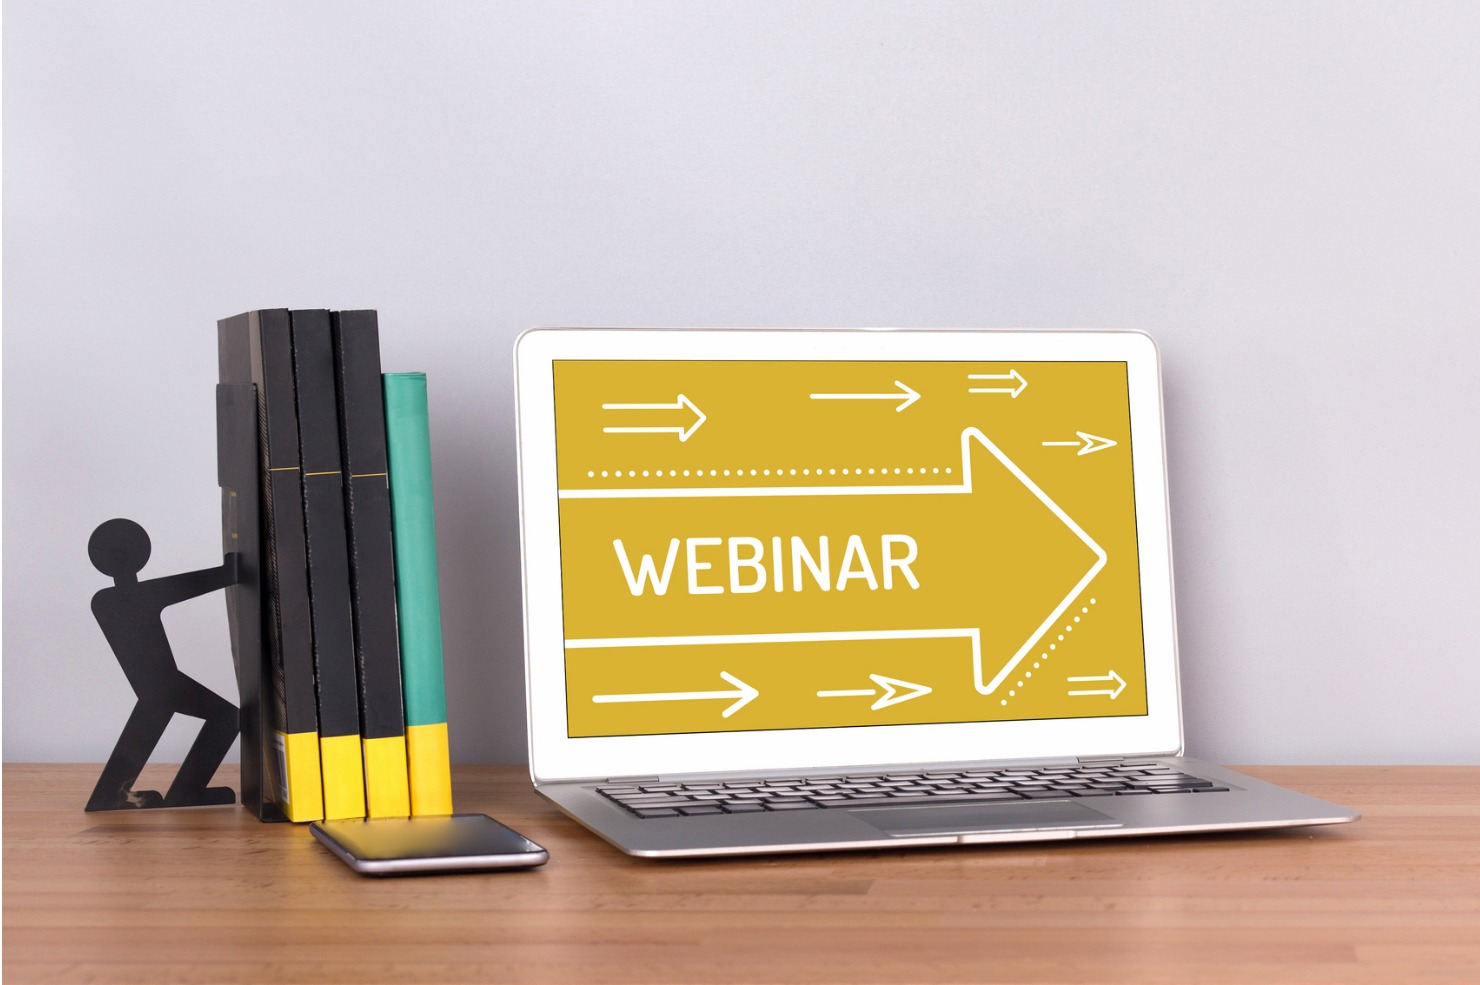 Take part in one or our educational webinar